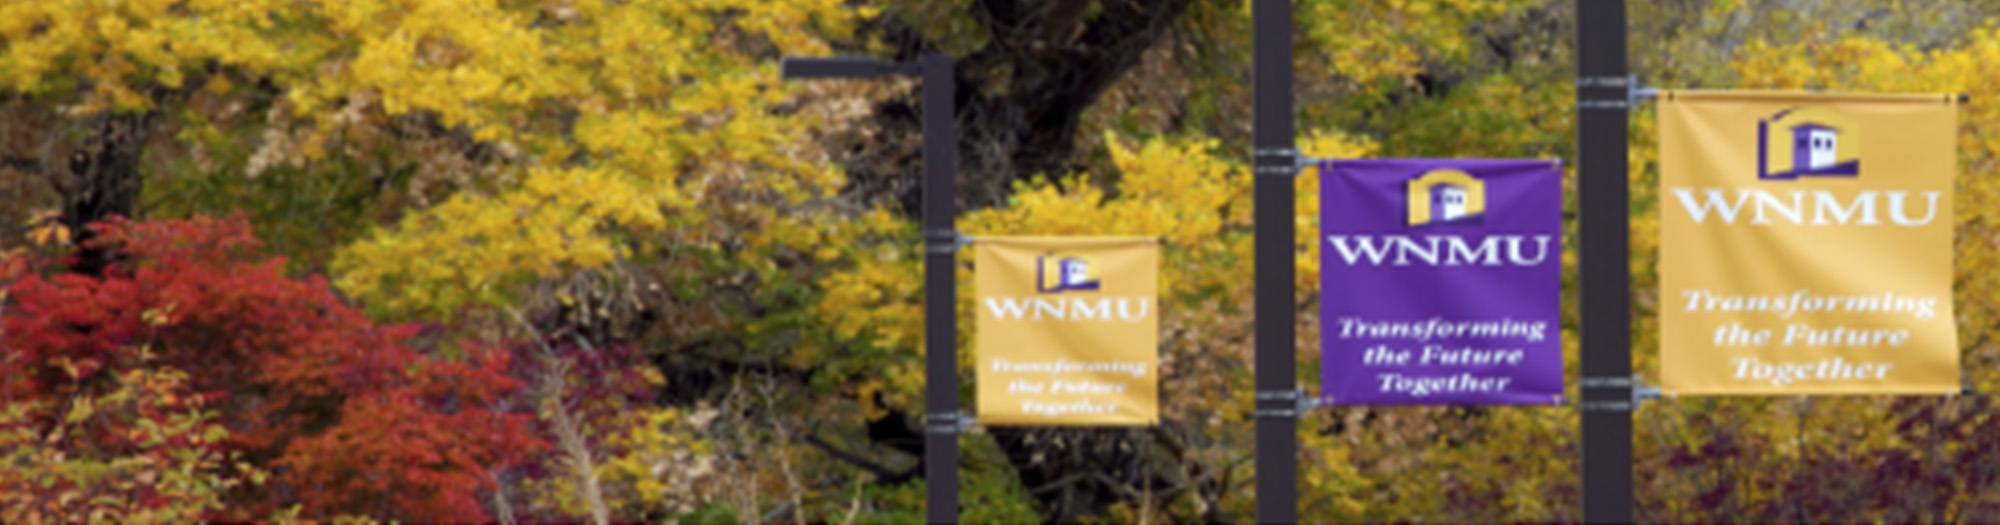 View of colorful trees and banners at WNMU